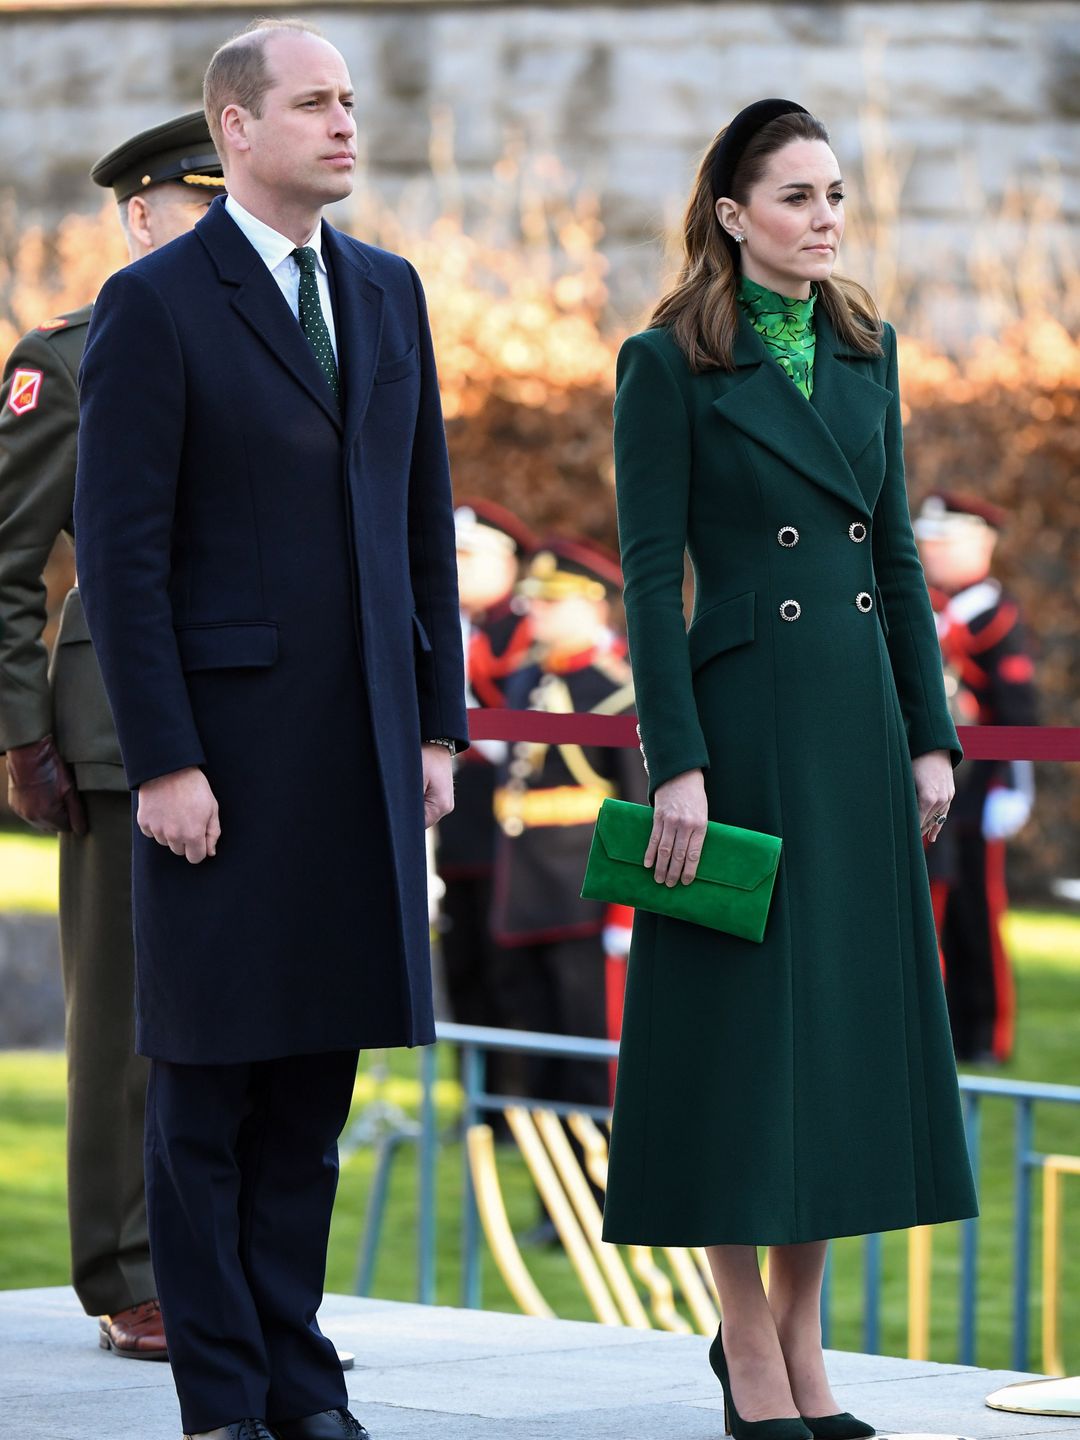 Princess Kate attended a commemorative wreath laying ceremony on March 3, 2020 wearing a green Catherine Walker coat which she later upcycled